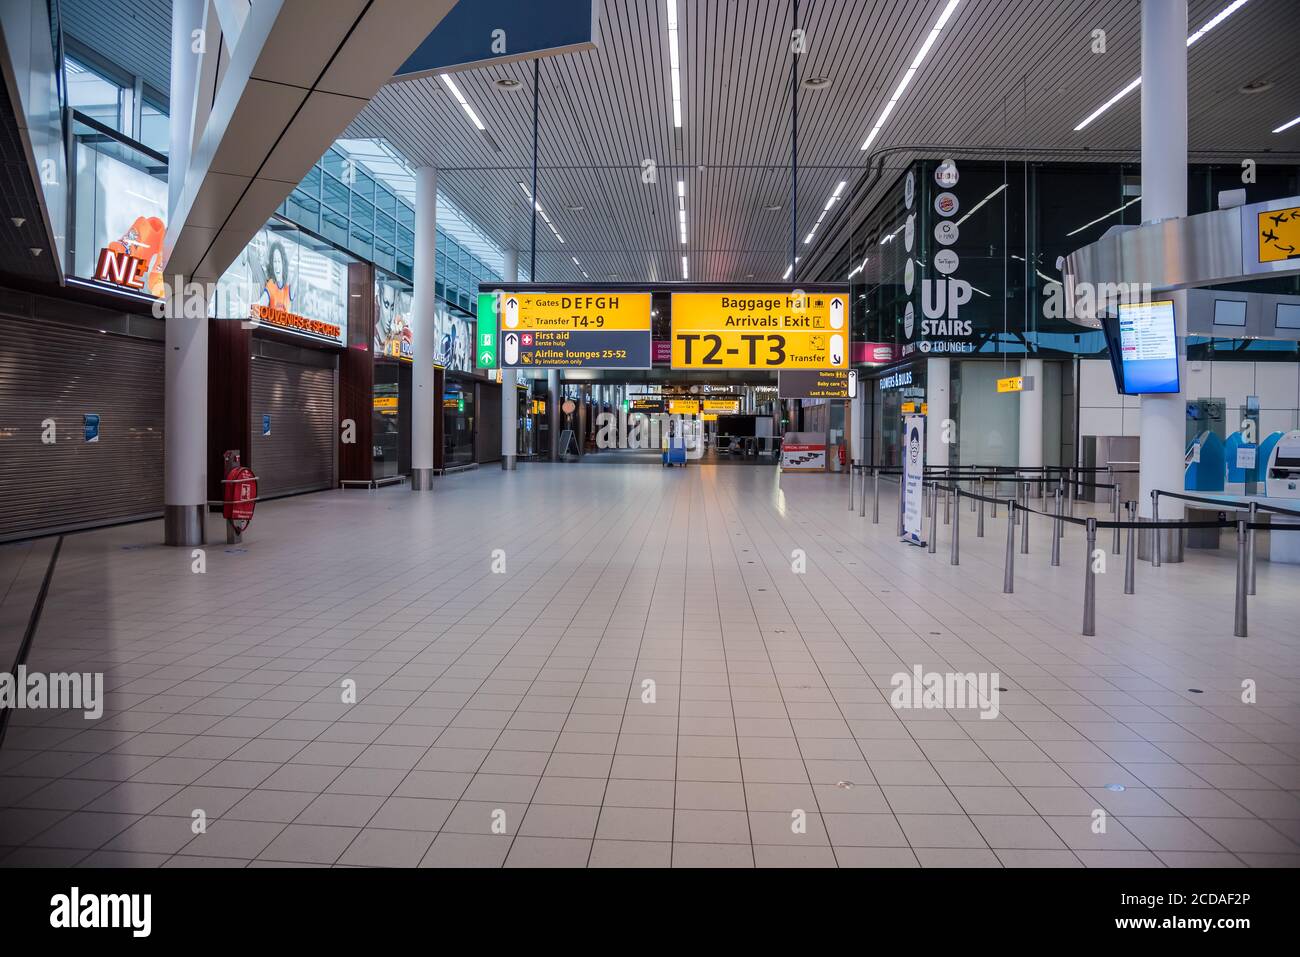 Schiphol airport, The Netherlands - June 27, 2020: Deserted hall with closed shops because of travel restrictions due to covid-19 pandemic Stock Photo